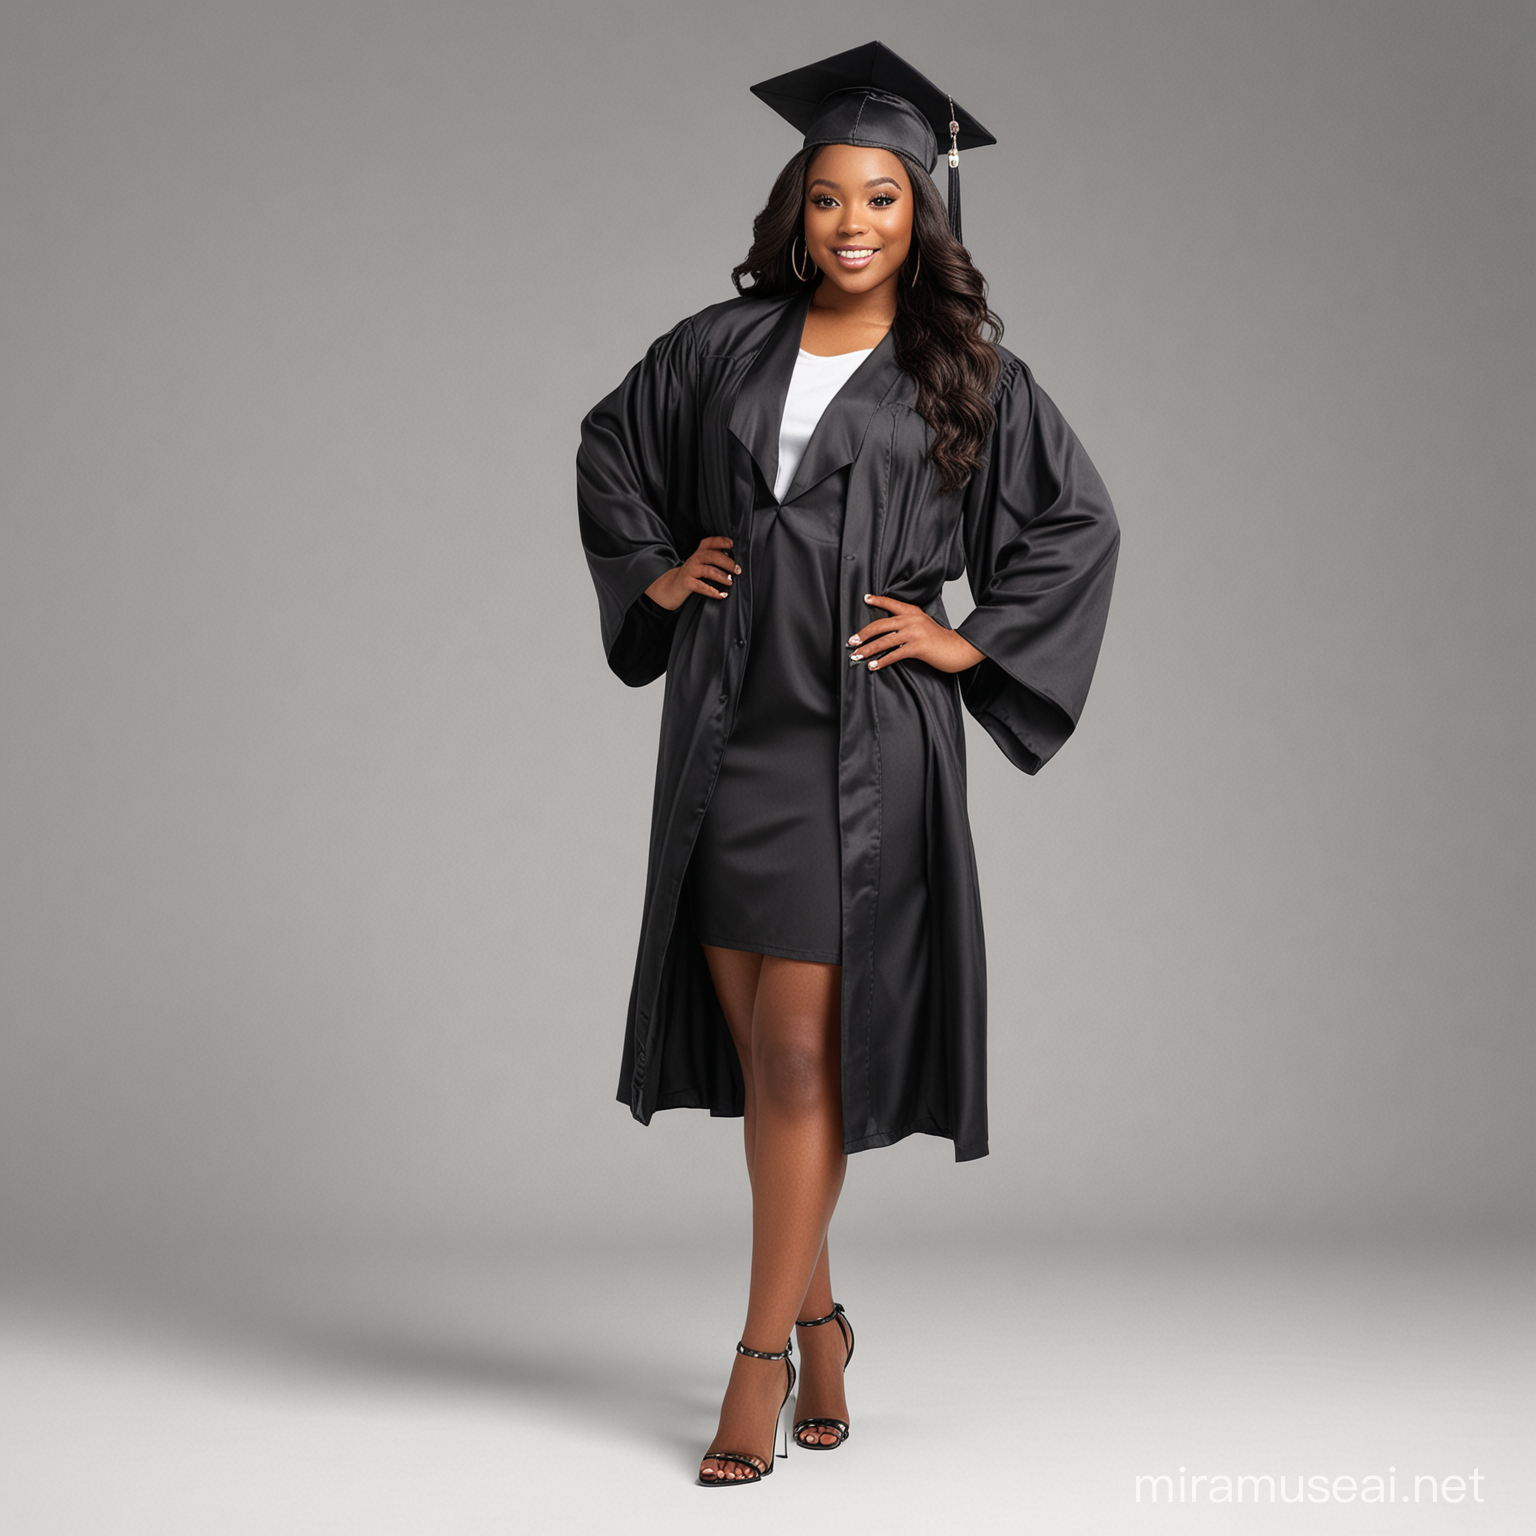 Professional mockup photo of a beautiful black female 20 wearing a black graduation cap and gown with long black body wave hair with glam make up, holding her hip with nice long legs showing out the gown, hyper-realistic, facing camera, showing t-shirt, studio lighting, full body, 7mm lens, white background.